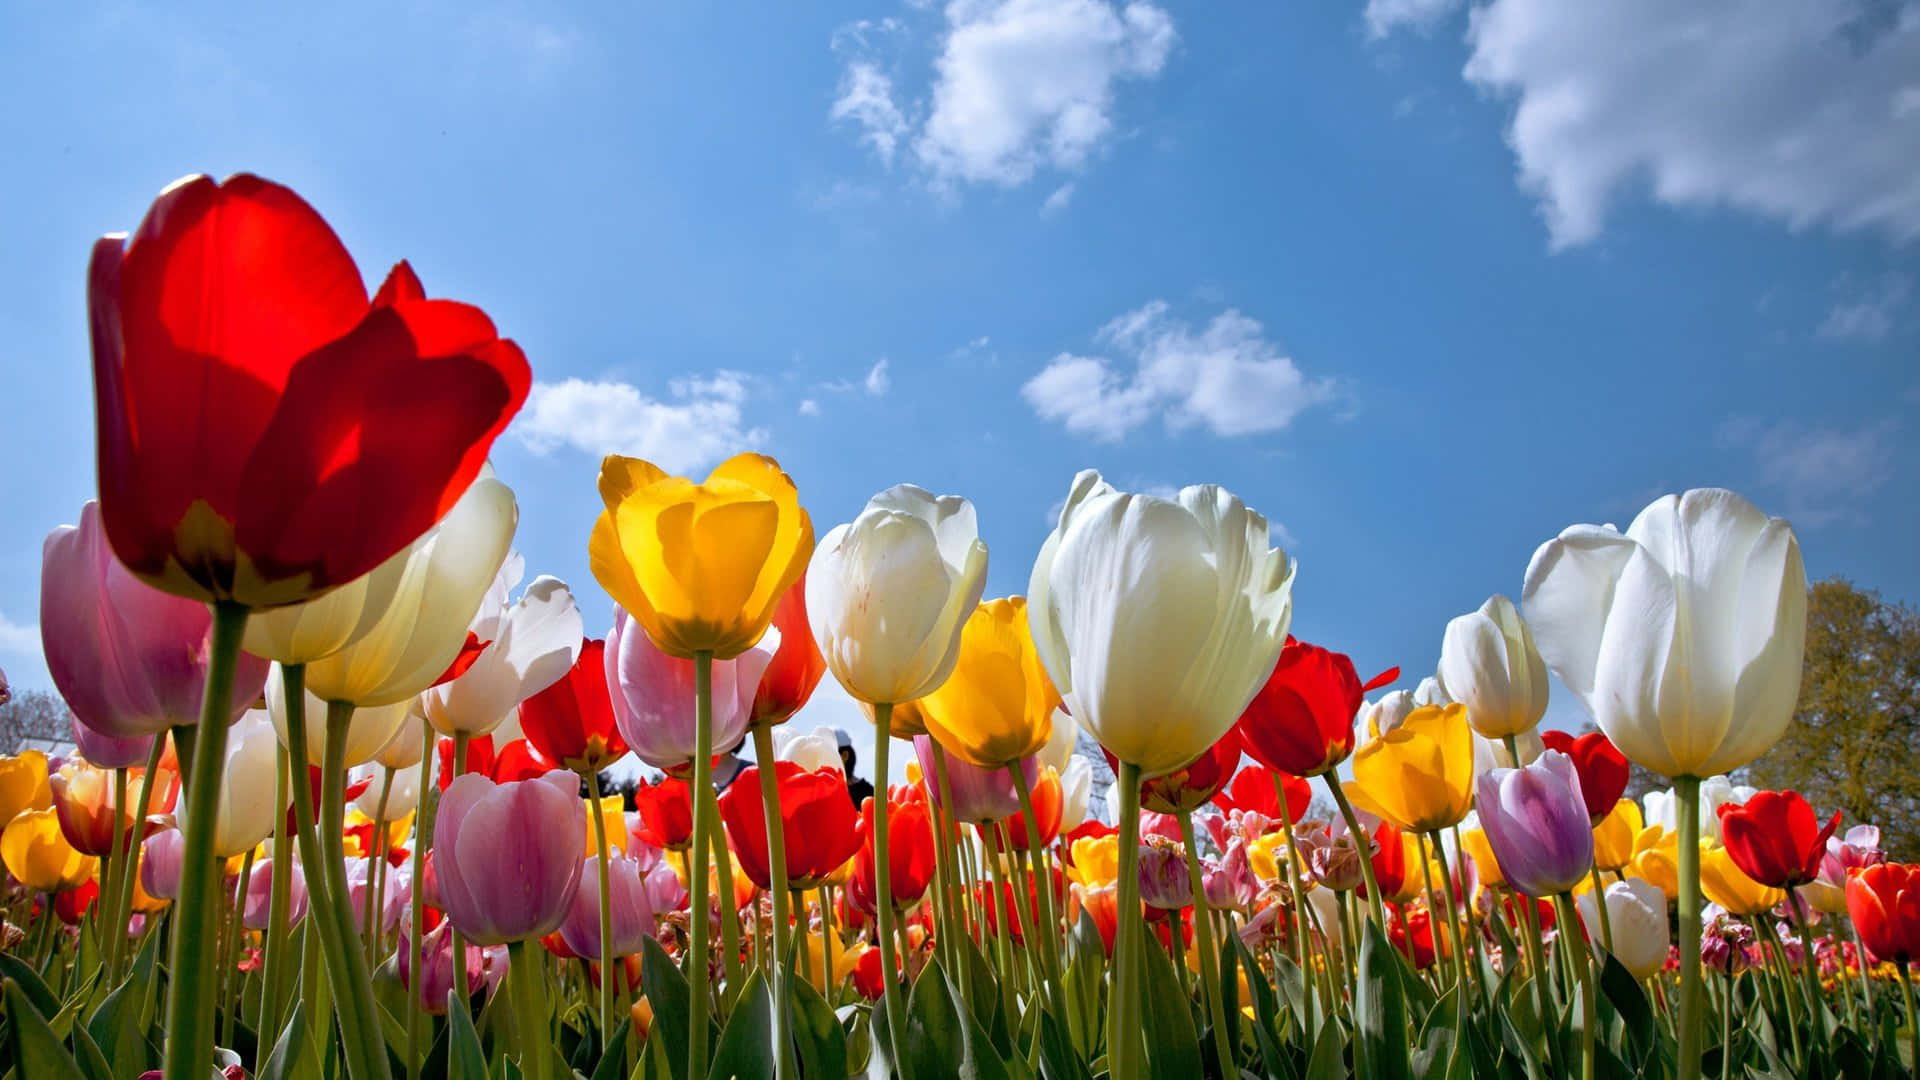 1920 X 1080 Flower Colorful Tulips Summer Wallpaper